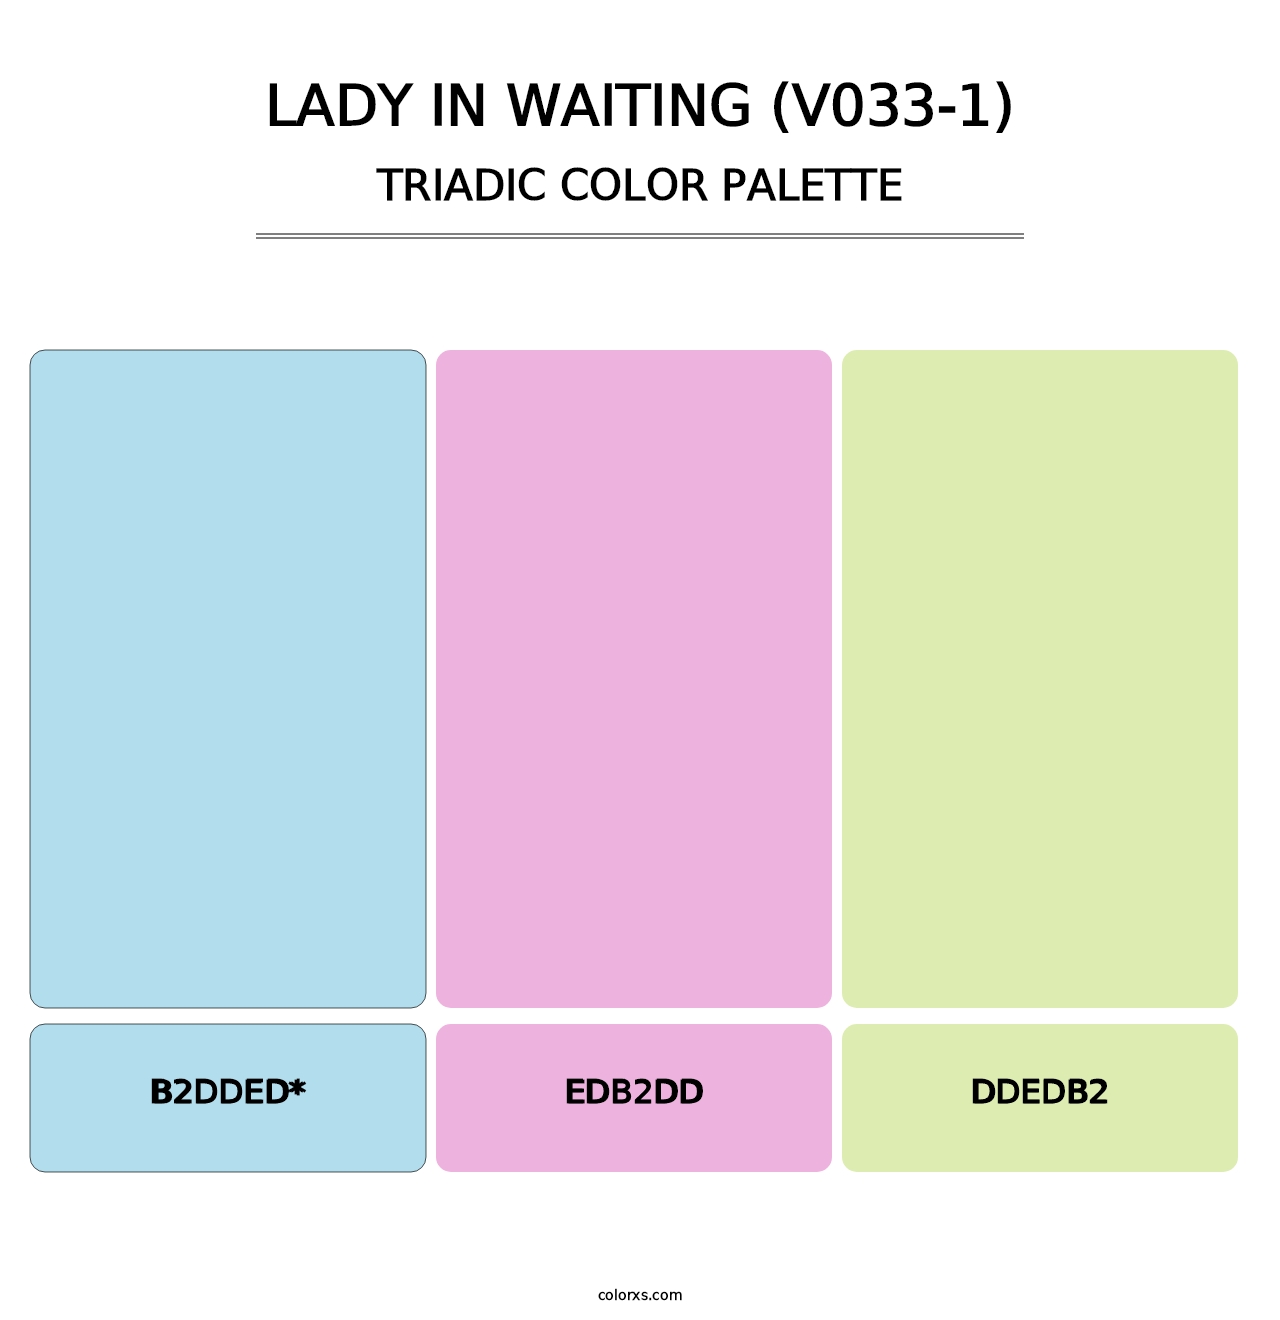 Lady in Waiting (V033-1) - Triadic Color Palette